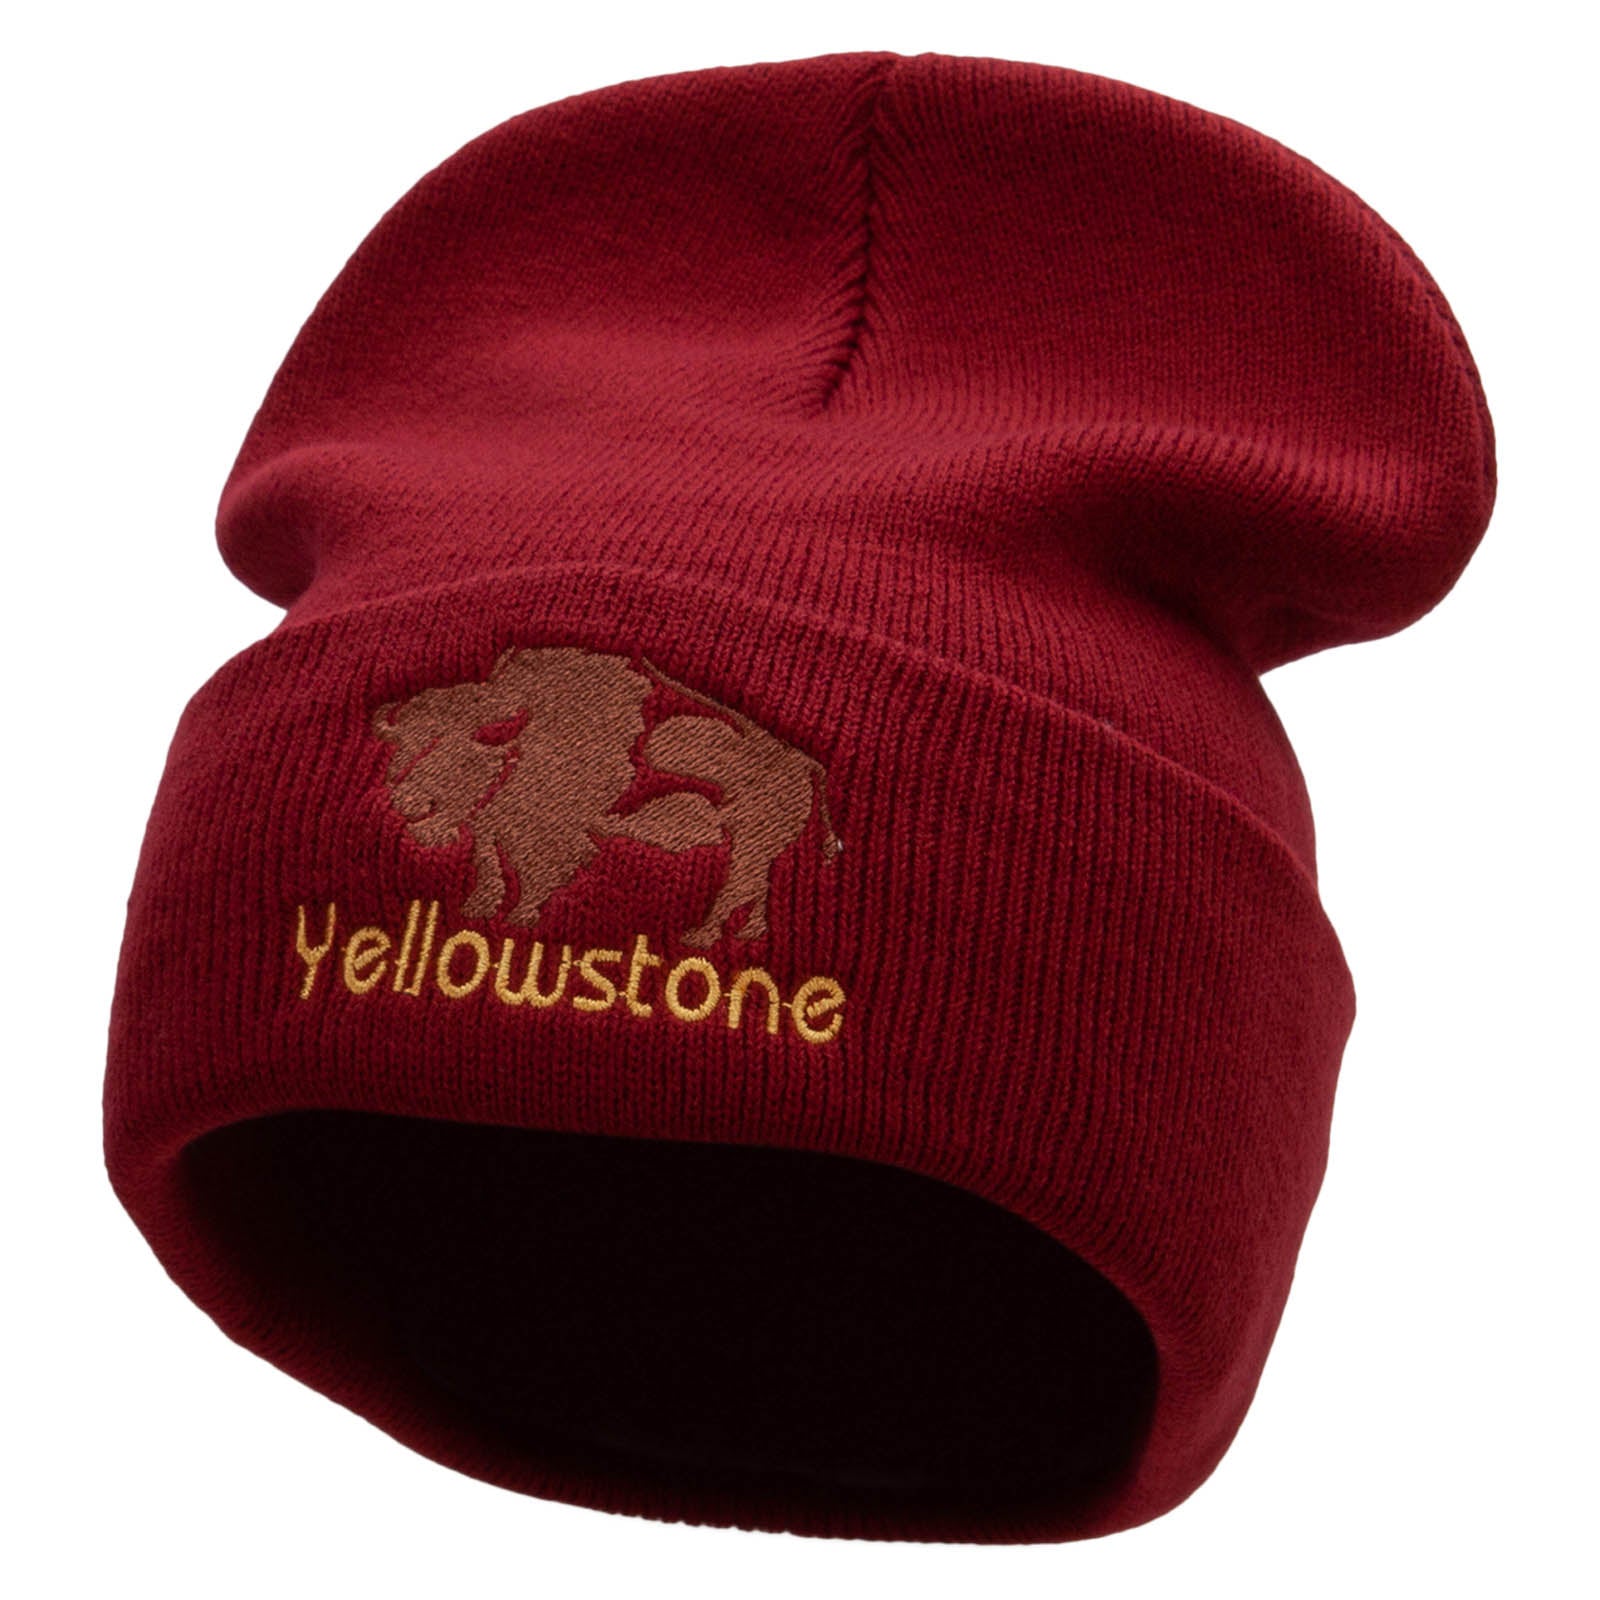 Yellowstone Big Buffalo Embroidered 12 Inch Long Knitted Beanie - Maroon OSFM